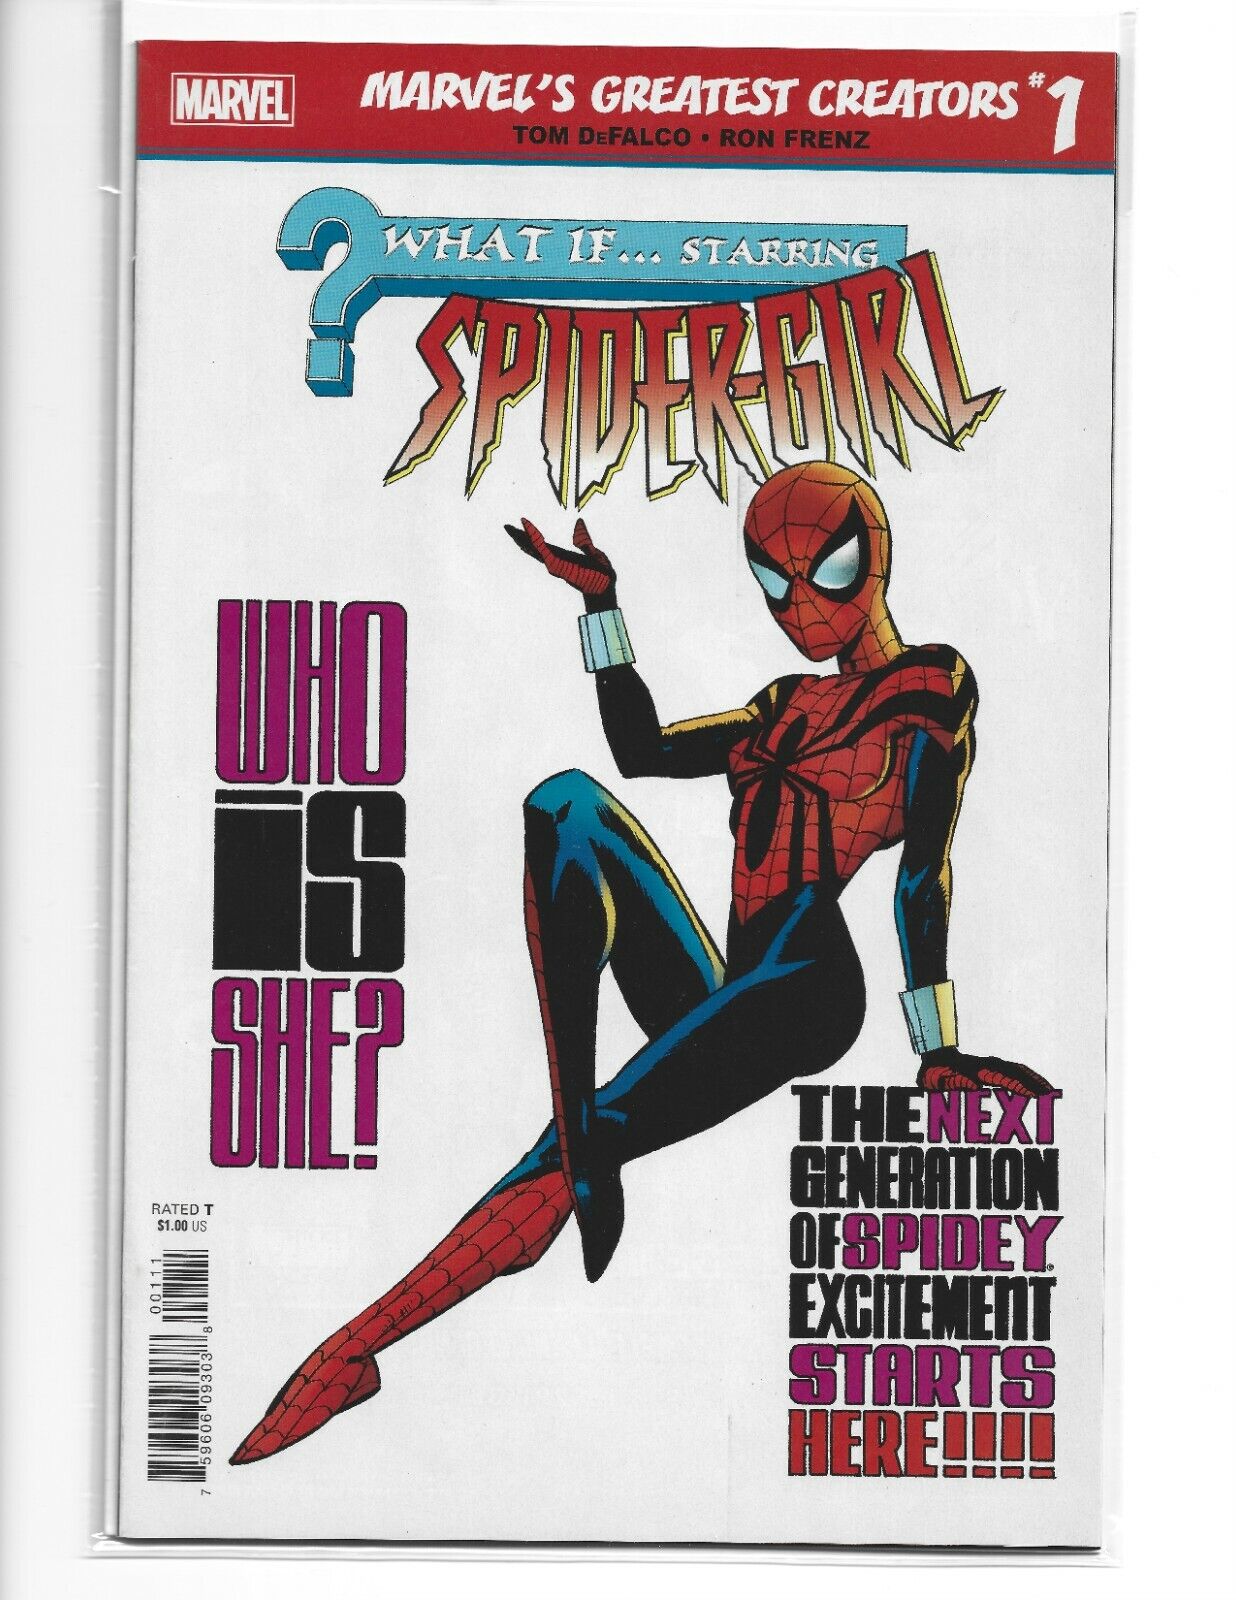 MARVEL'S GREATEST CREATORS WHAT IF STARRING SPIDER-GIRL 1 Reprint 105